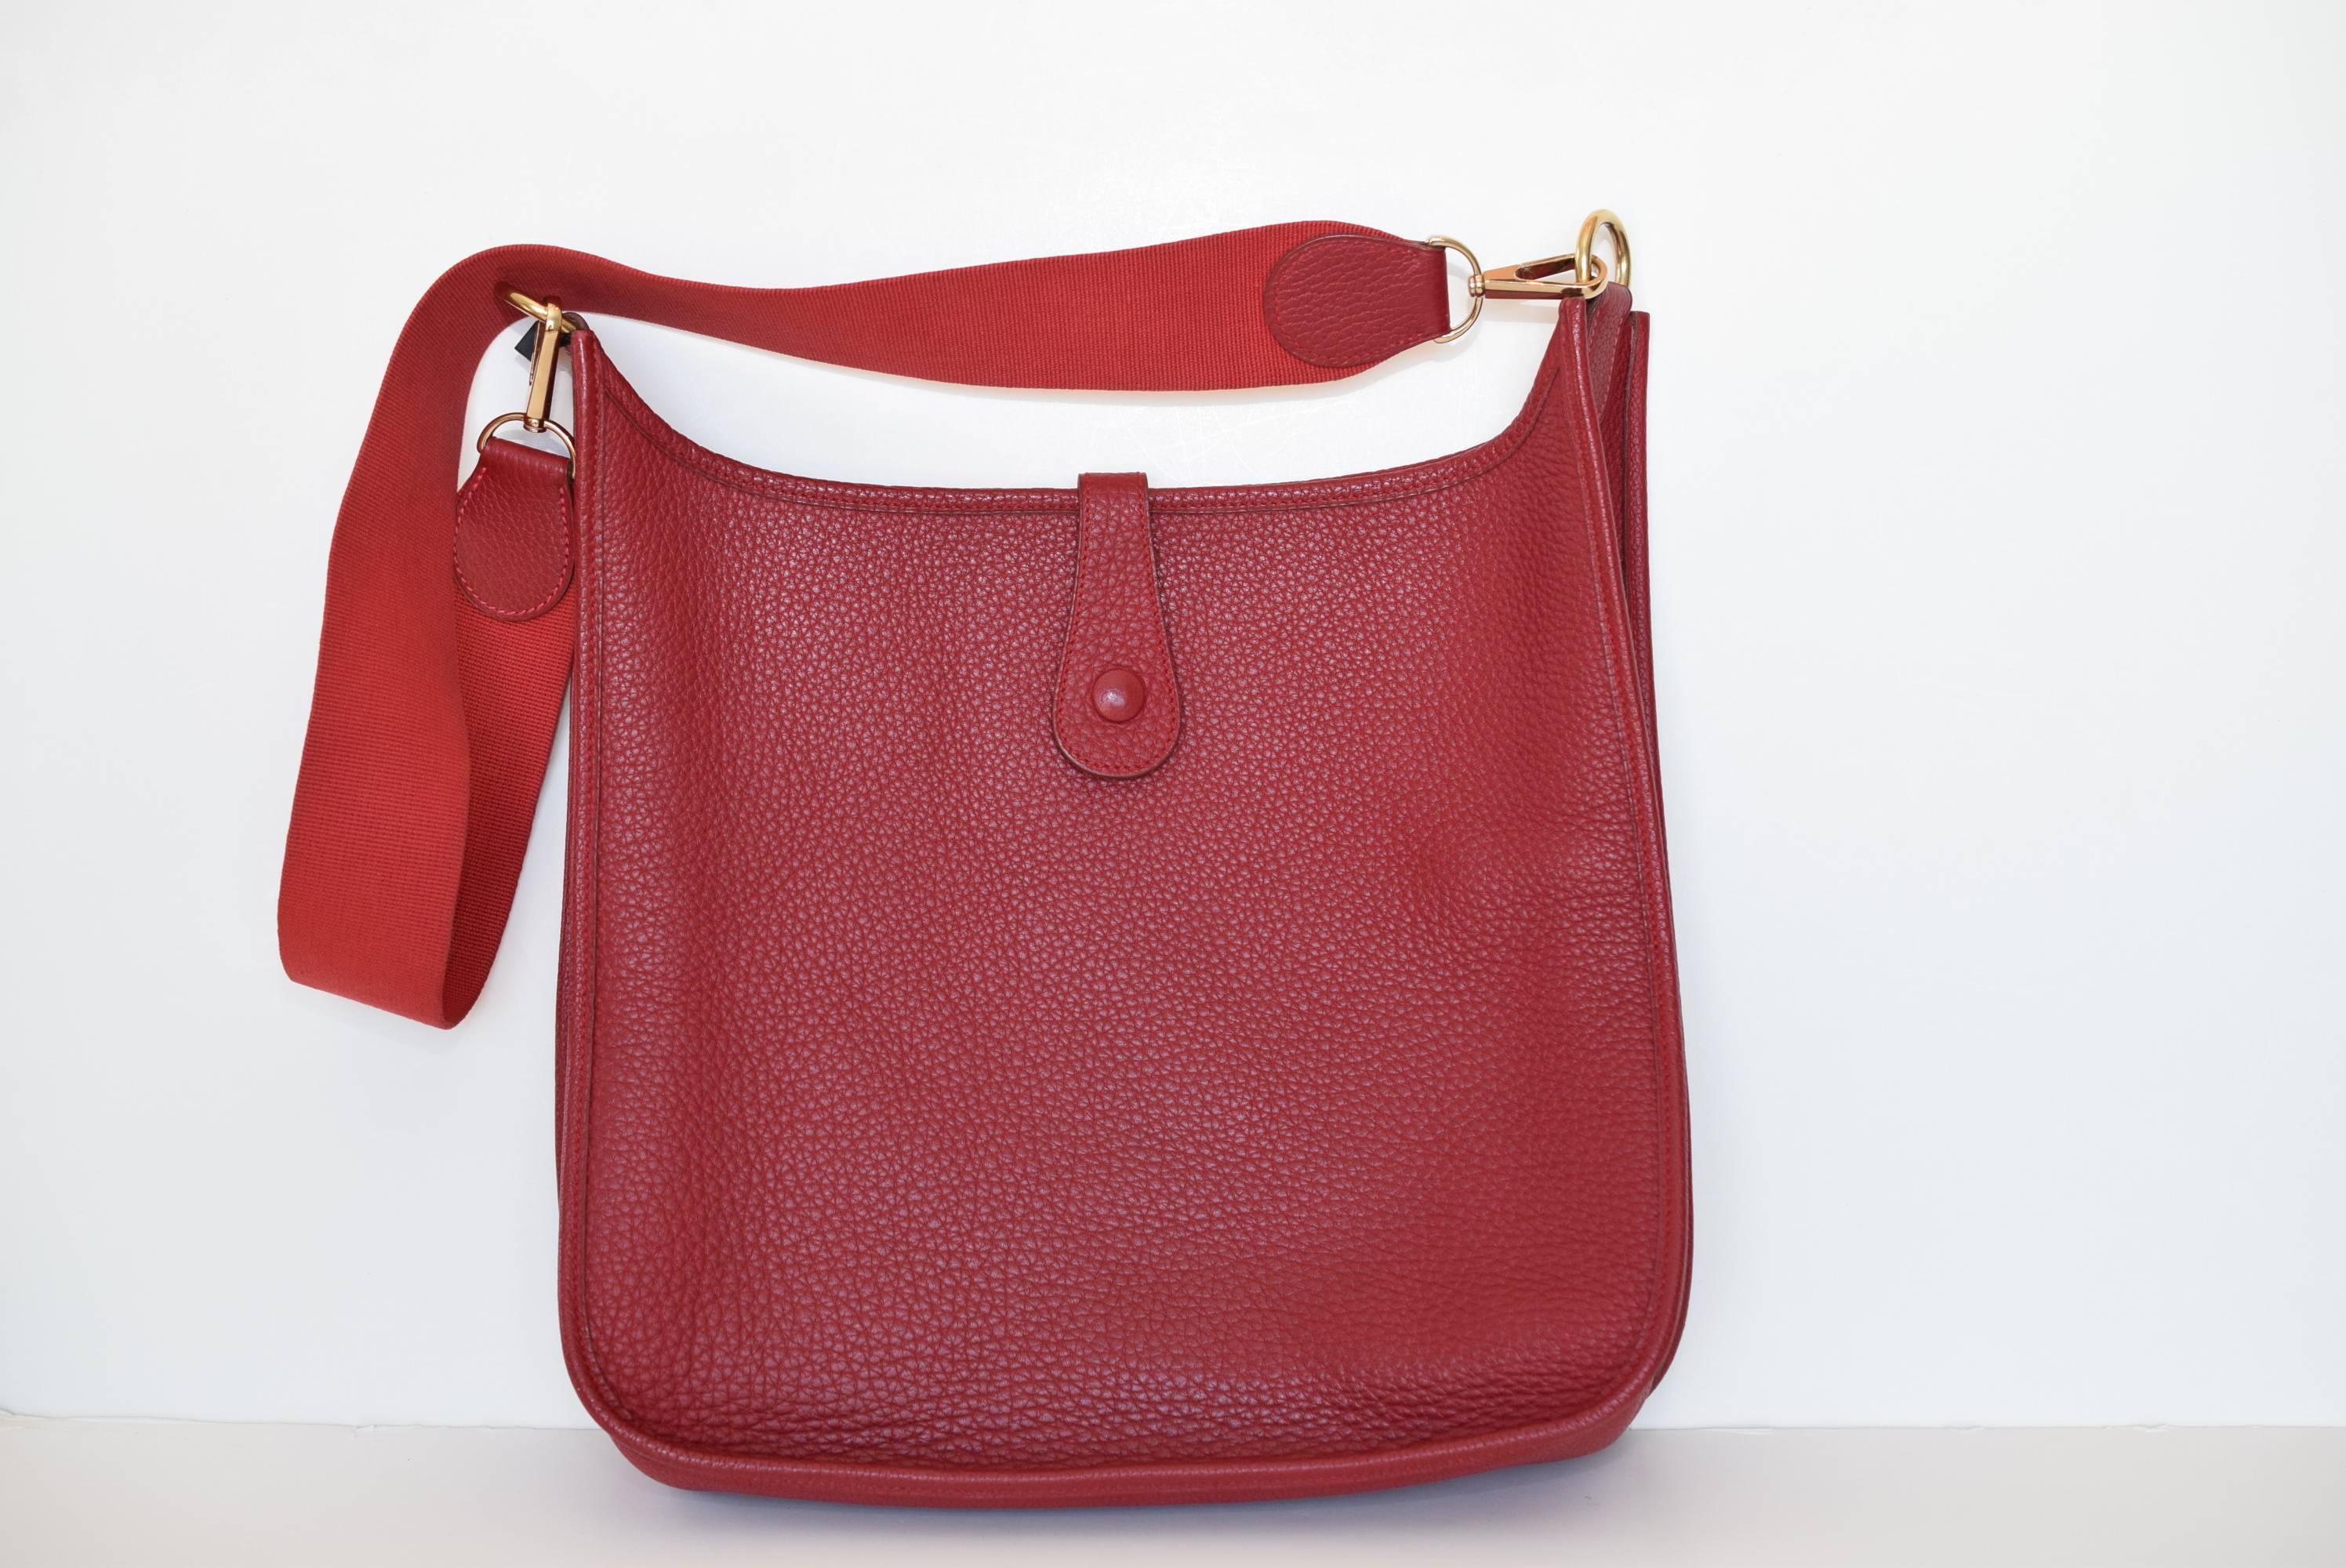 Red Clemence leather Hermes Evelyn l GM with goldstone hardware, perforated logo at front, red suede interior lining and snap closure at back.  
Excellent condition.

Free Shipping 